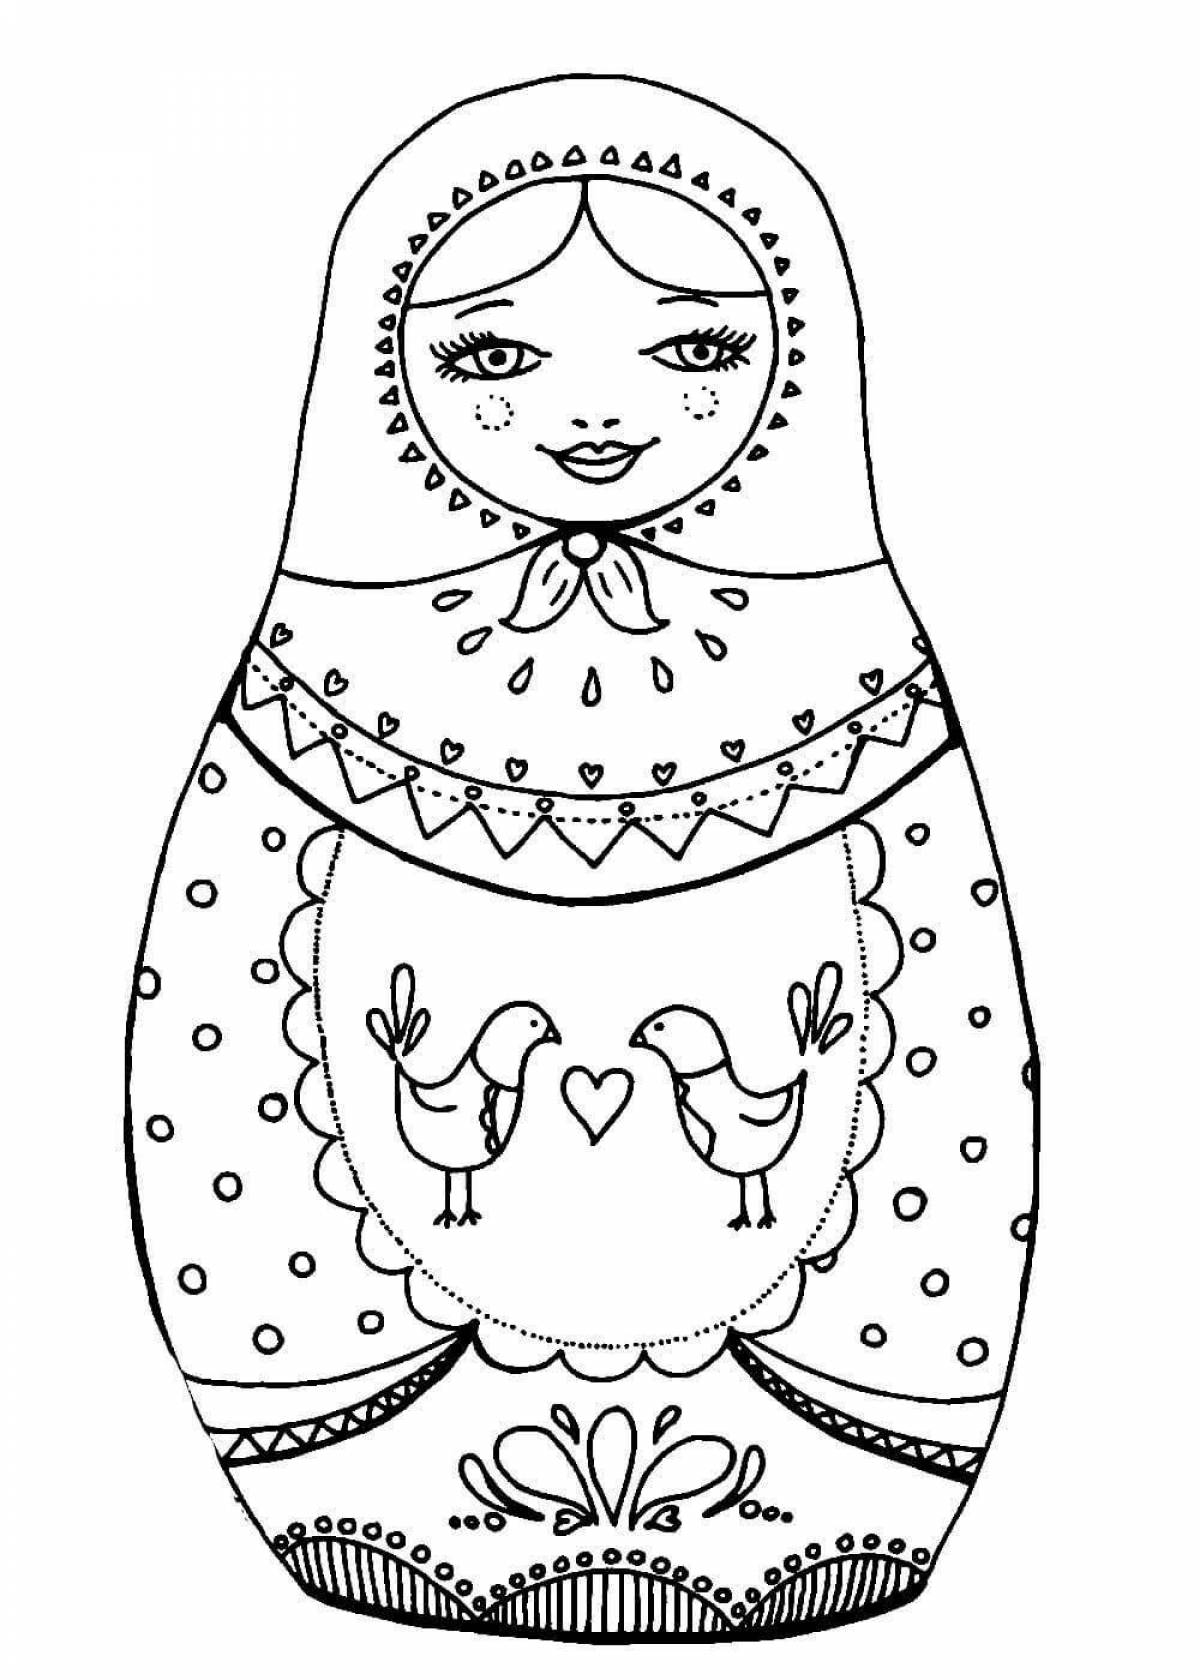 Charming matryoshka coloring book for children 5-6 years old